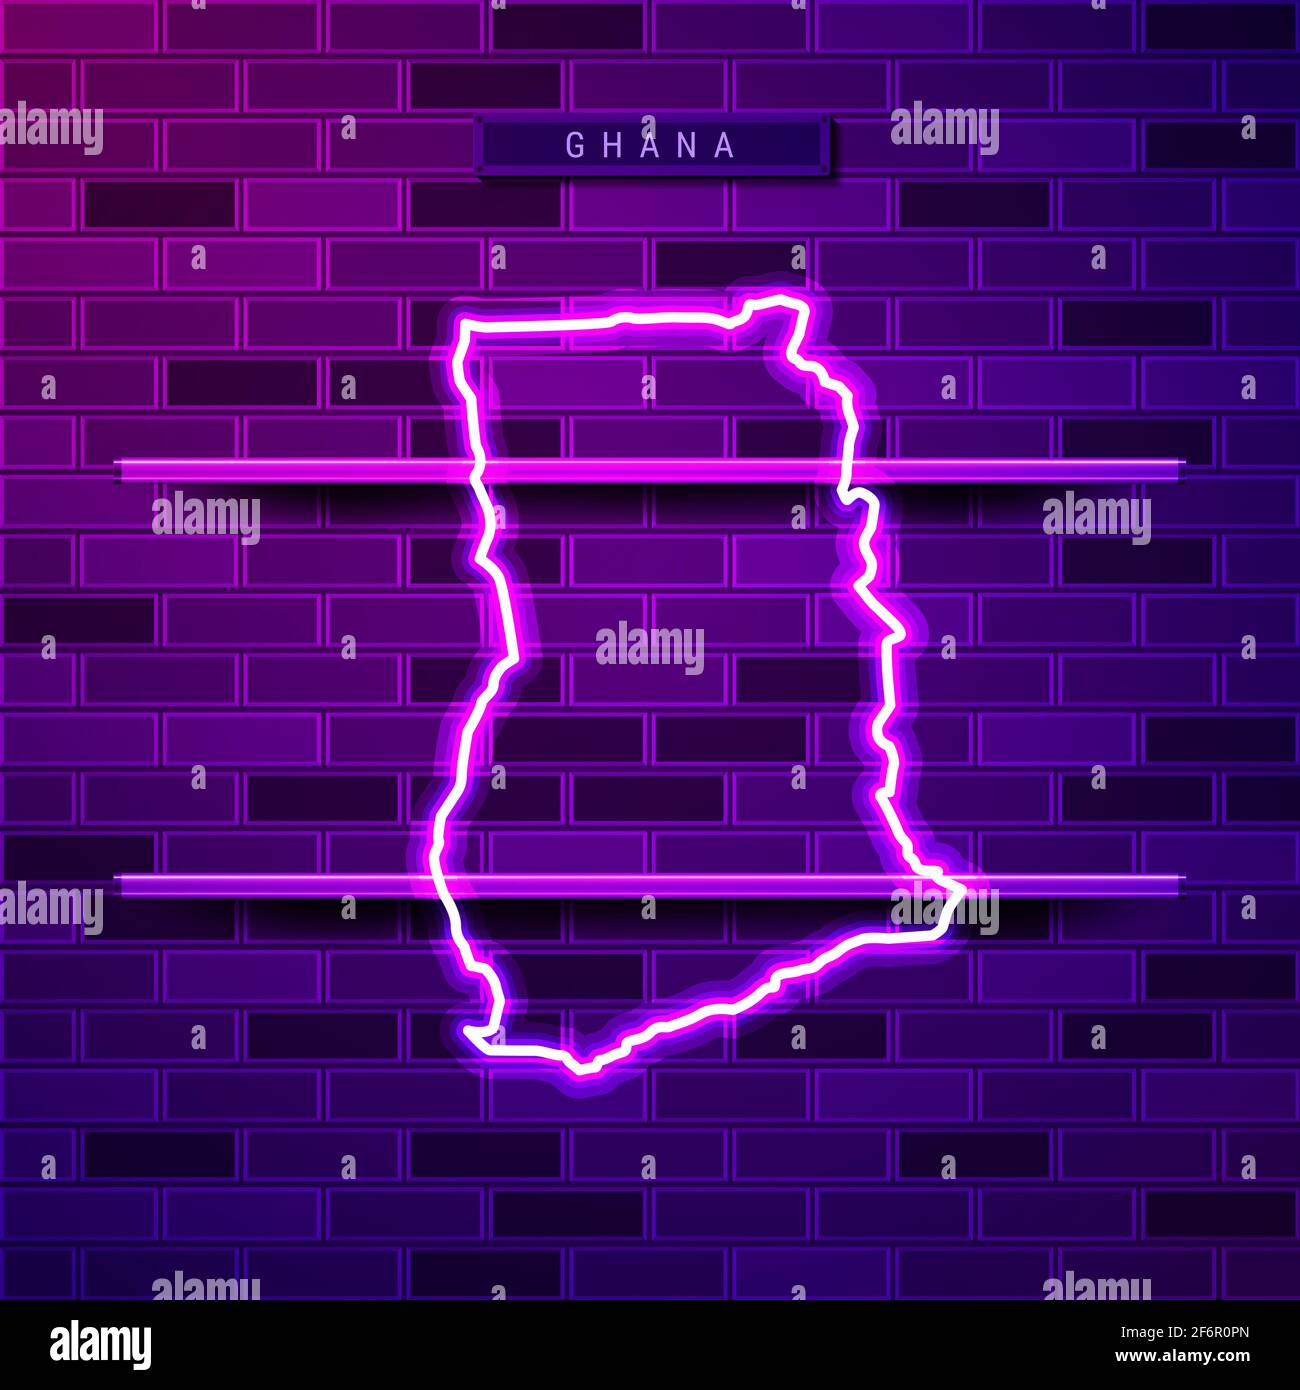 Ghana map glowing neon lamp sign. Realistic illustration. Country name plate. Purple brick wall, violet glow, metal holders. Stock Photo